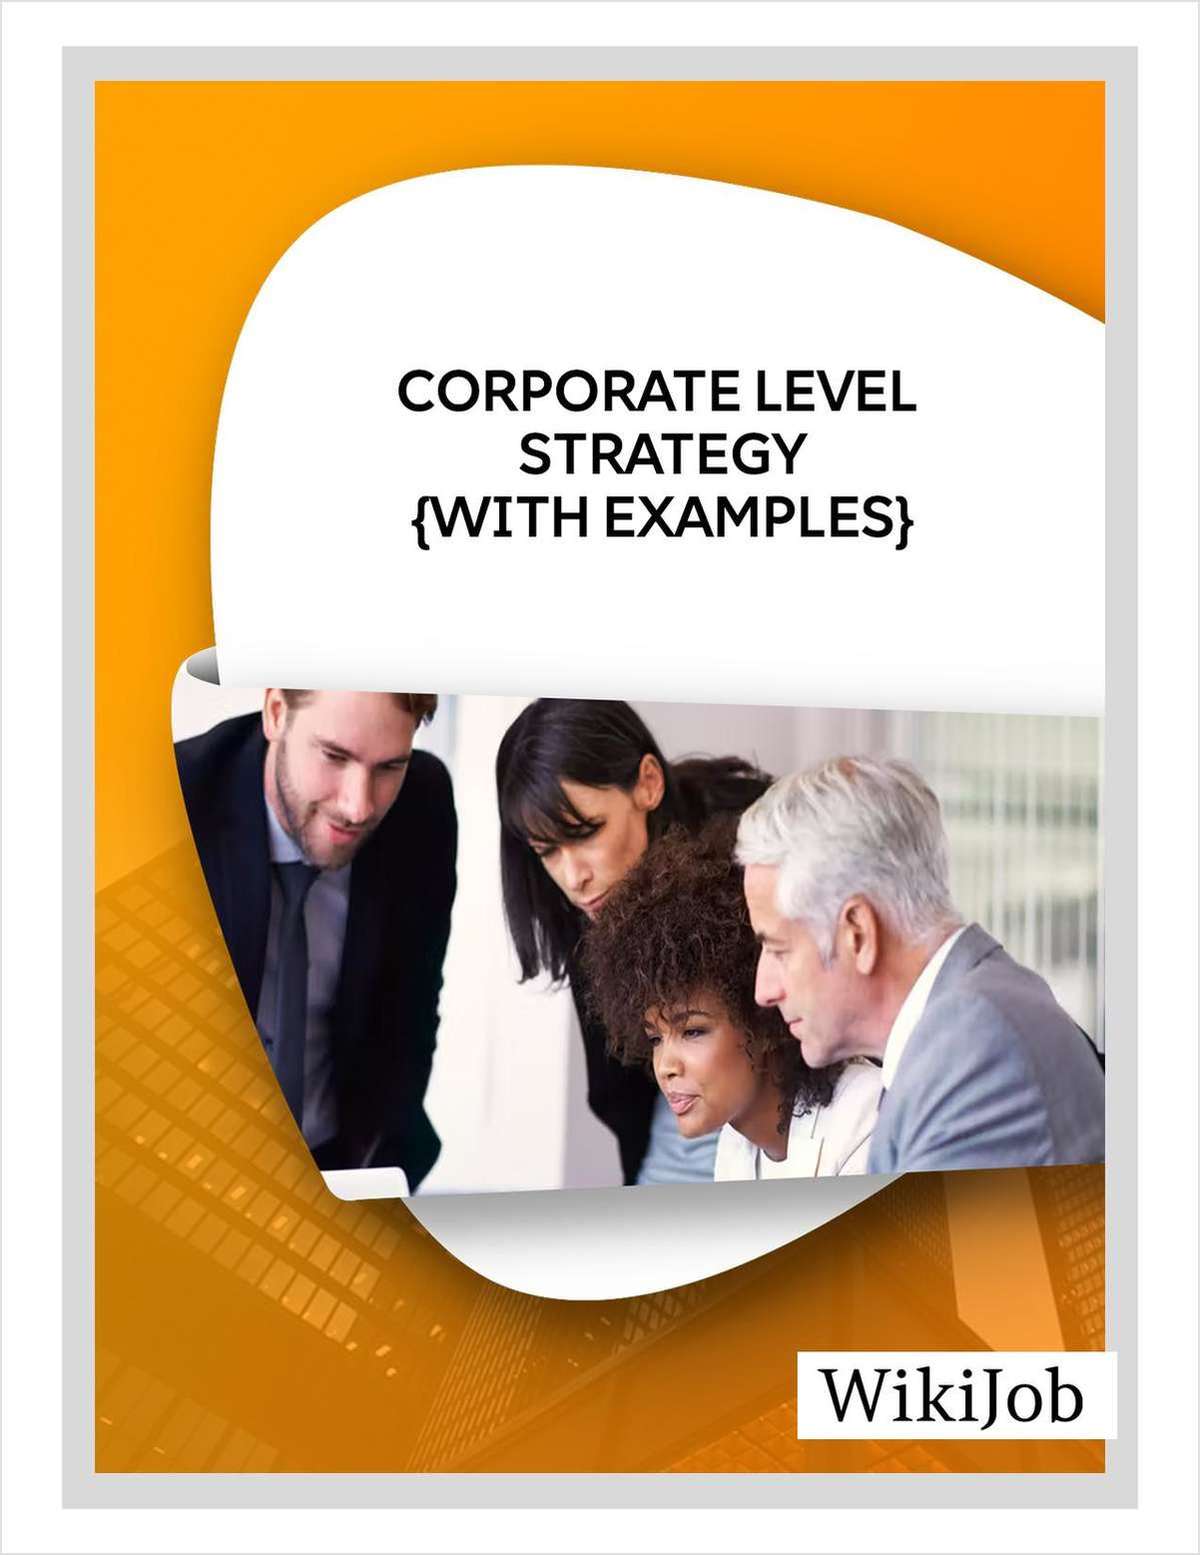 What Is a Corporate Level Strategy?